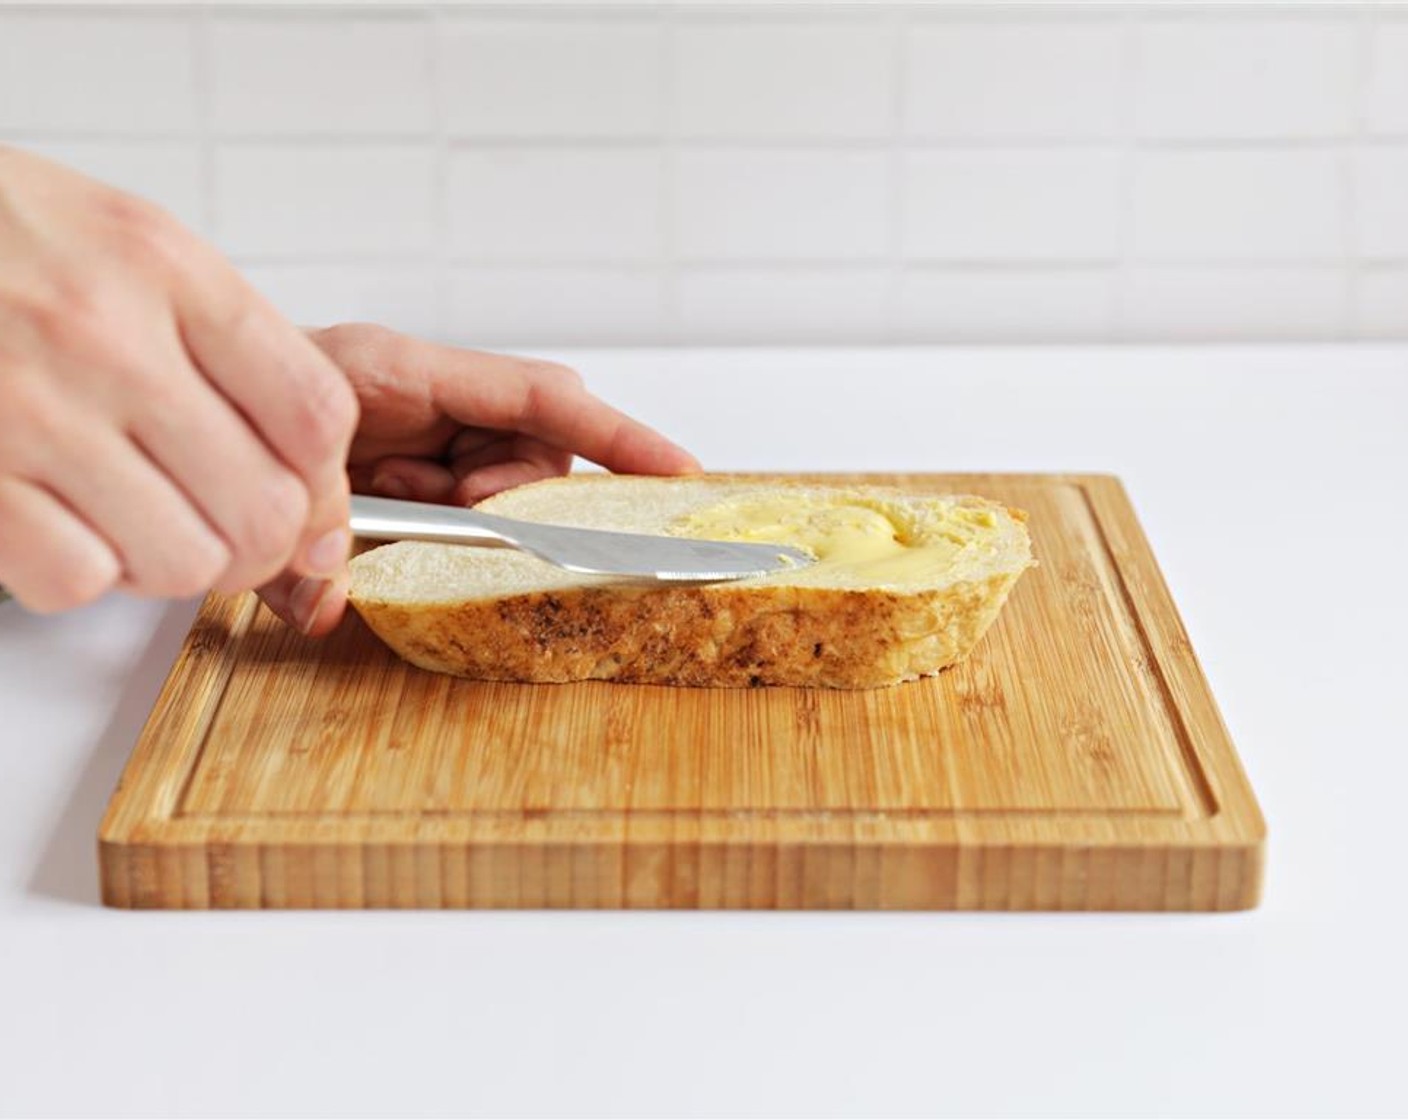 step 4 Spread 1 slice of bread with Unsalted Butter (1/2 Tbsp).